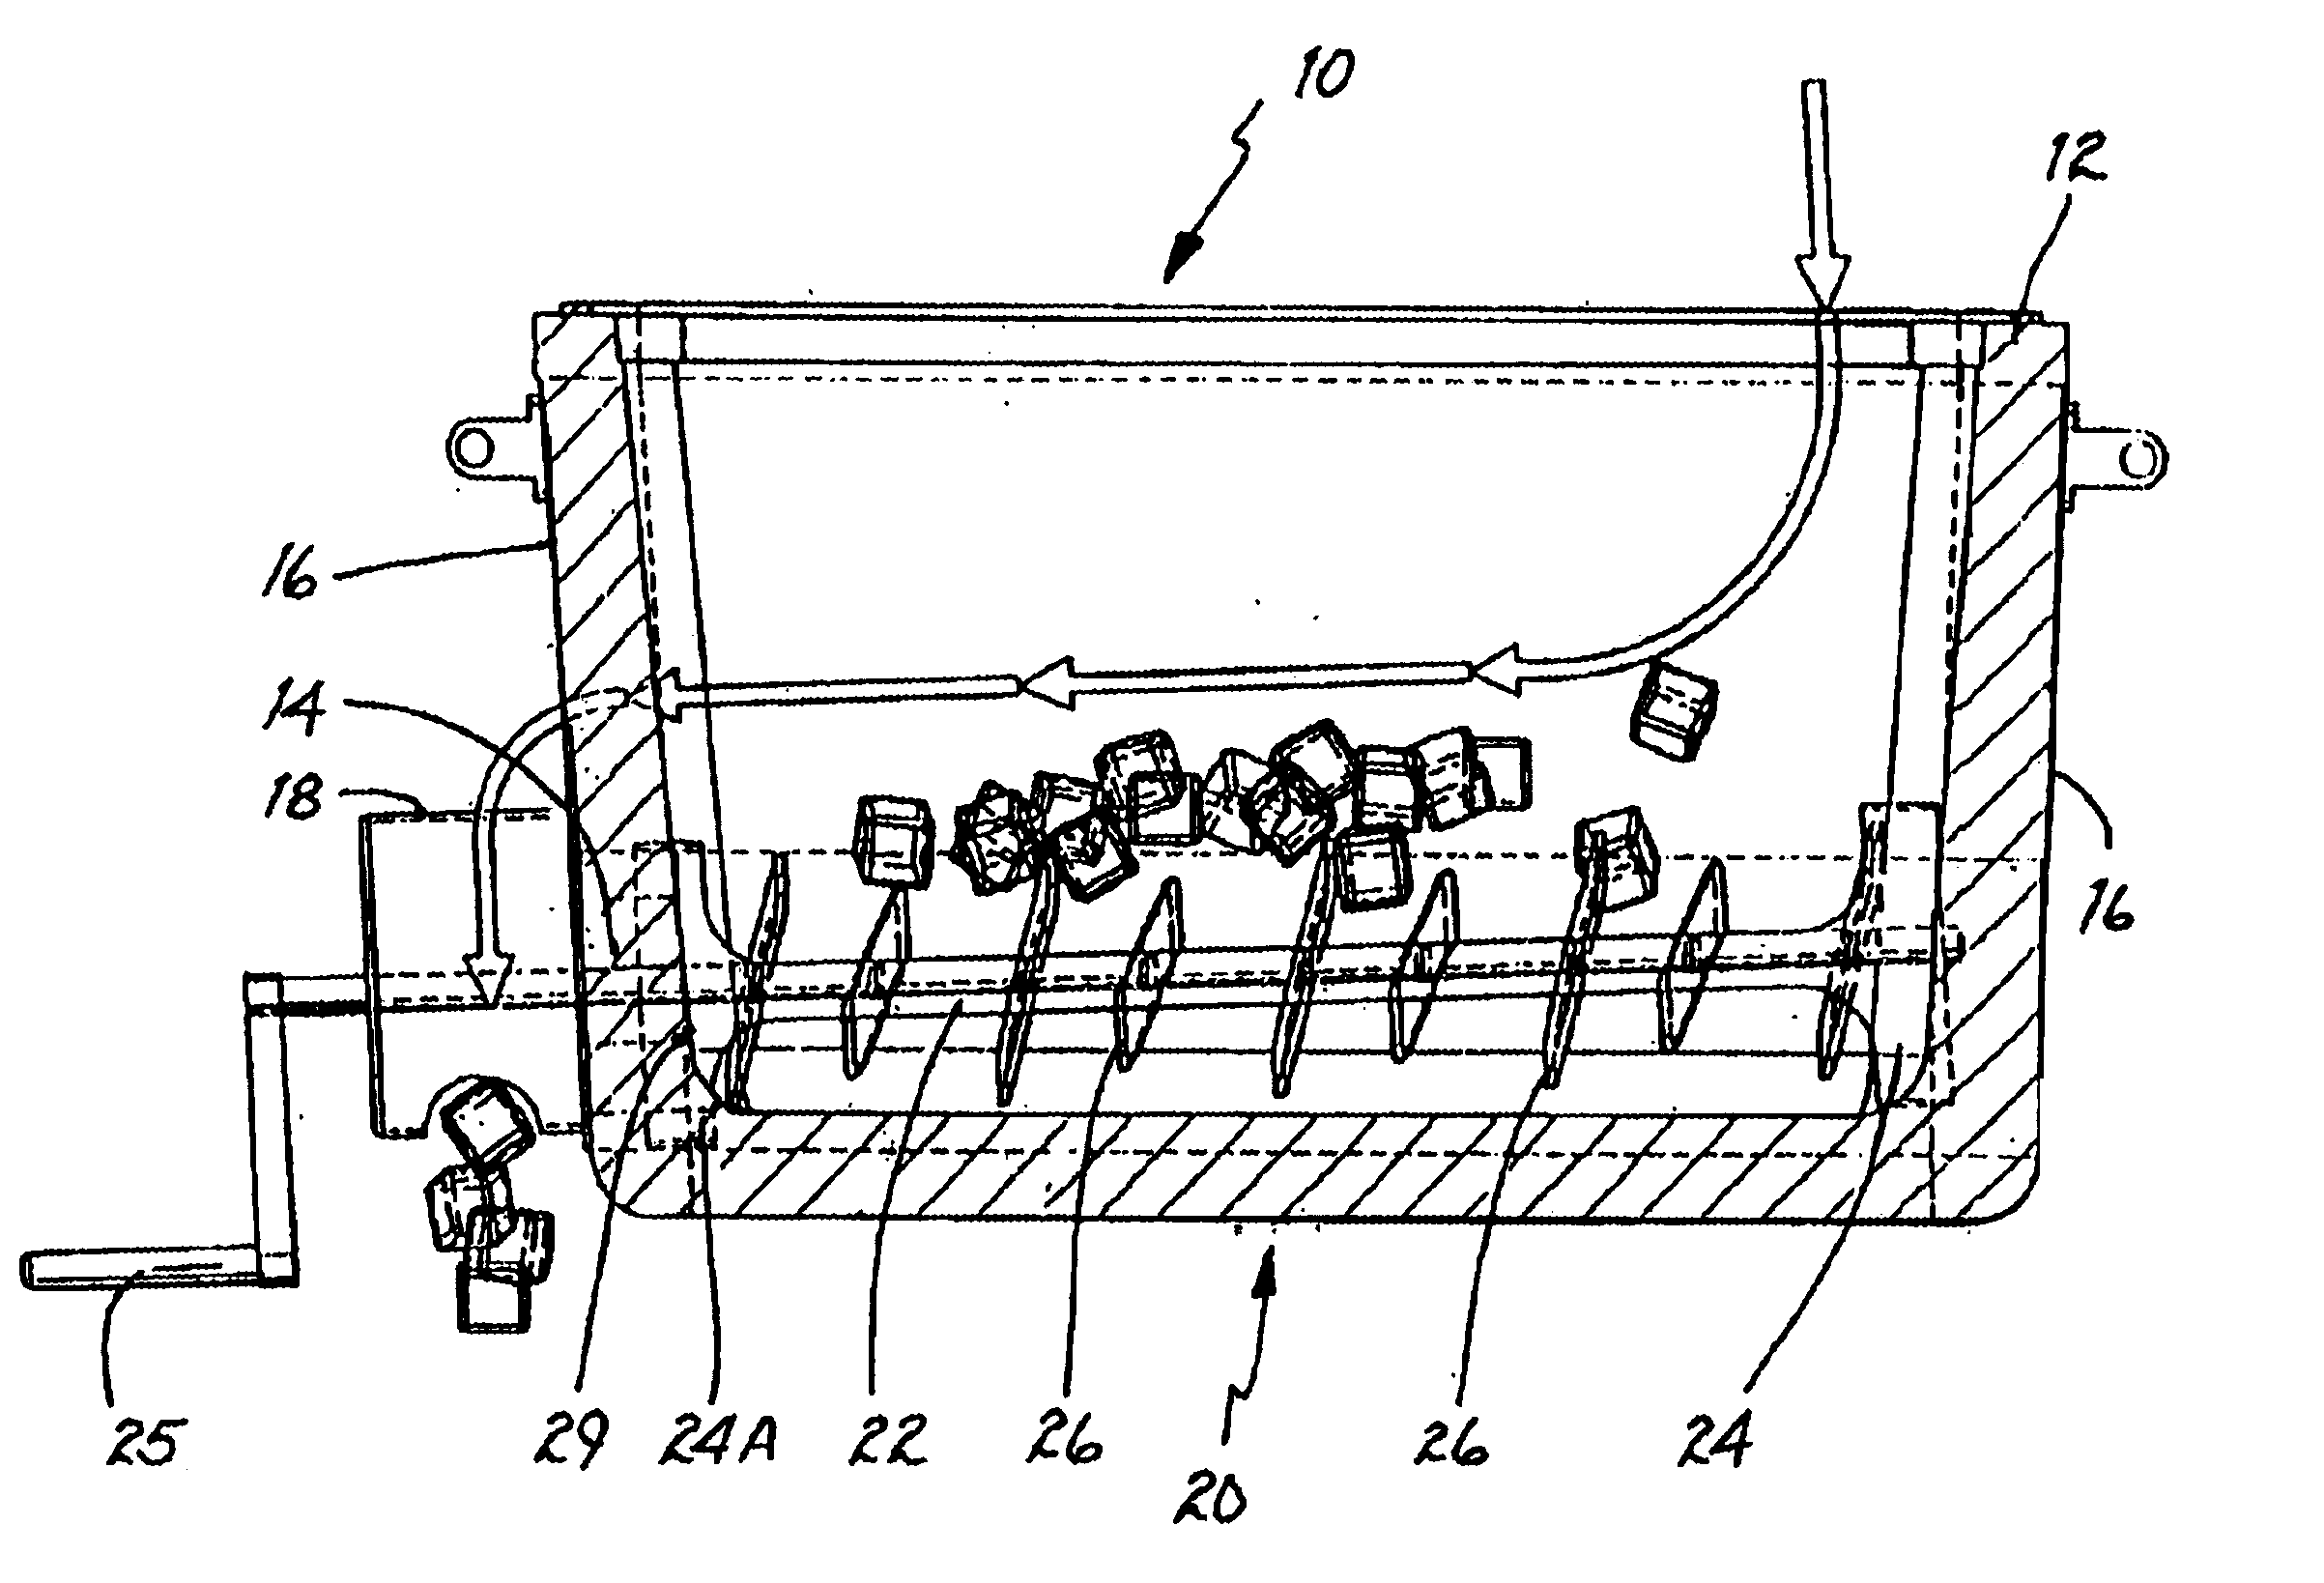 Portable ice storage container having an ice dispenser device and method therefor